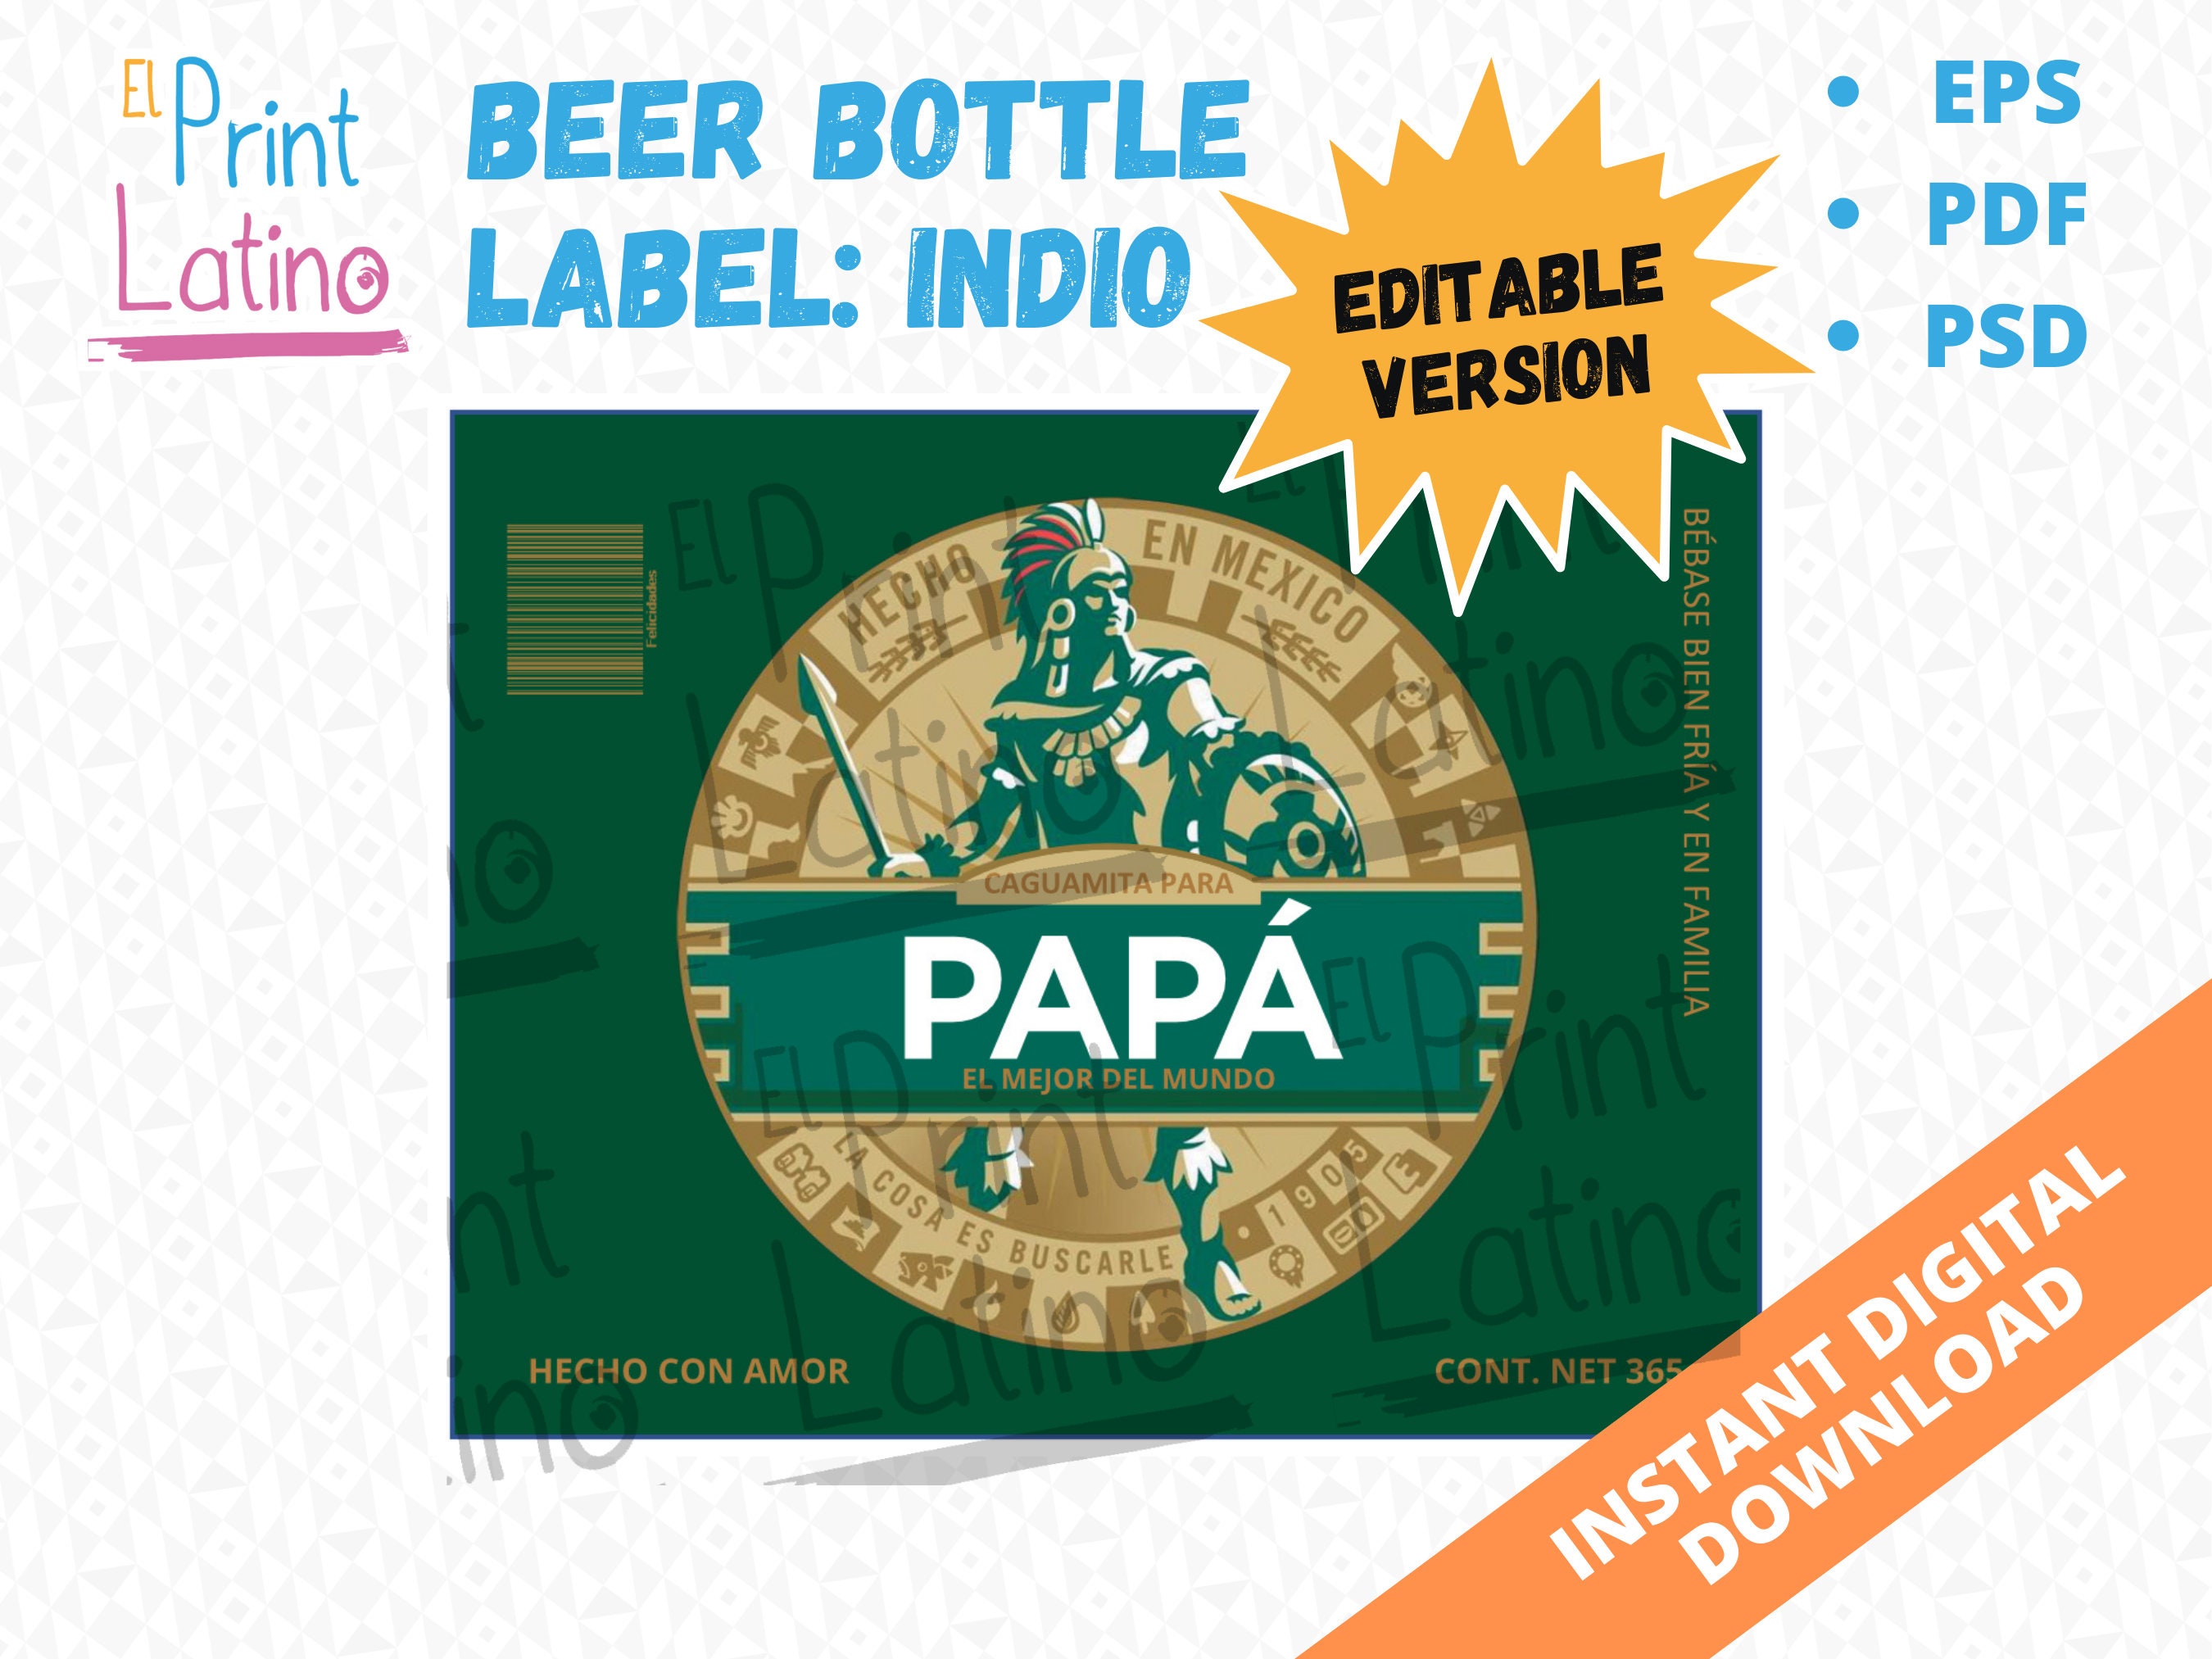 Editable Indio Label Make Your Own Indio Beer Labels